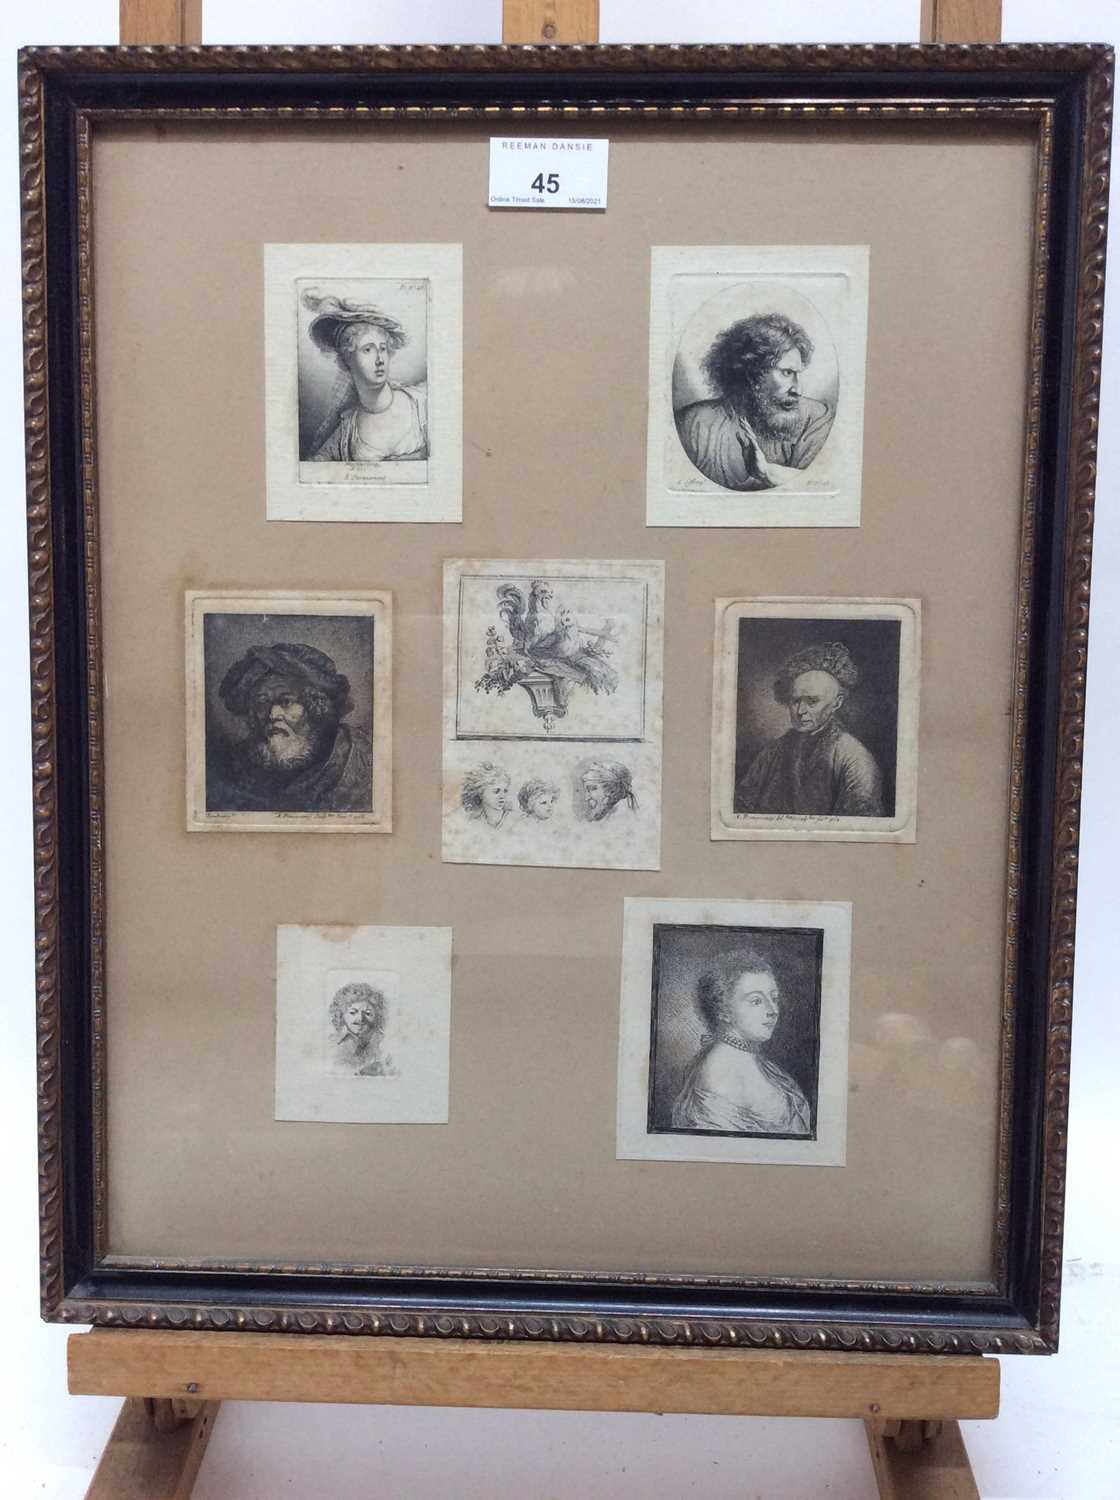 Lot 45 - Two framed displays of 18th century engravings after Rembrandt, Teniers and others, in glazed gilt and ebonised frames, 42cm x 34cm overall